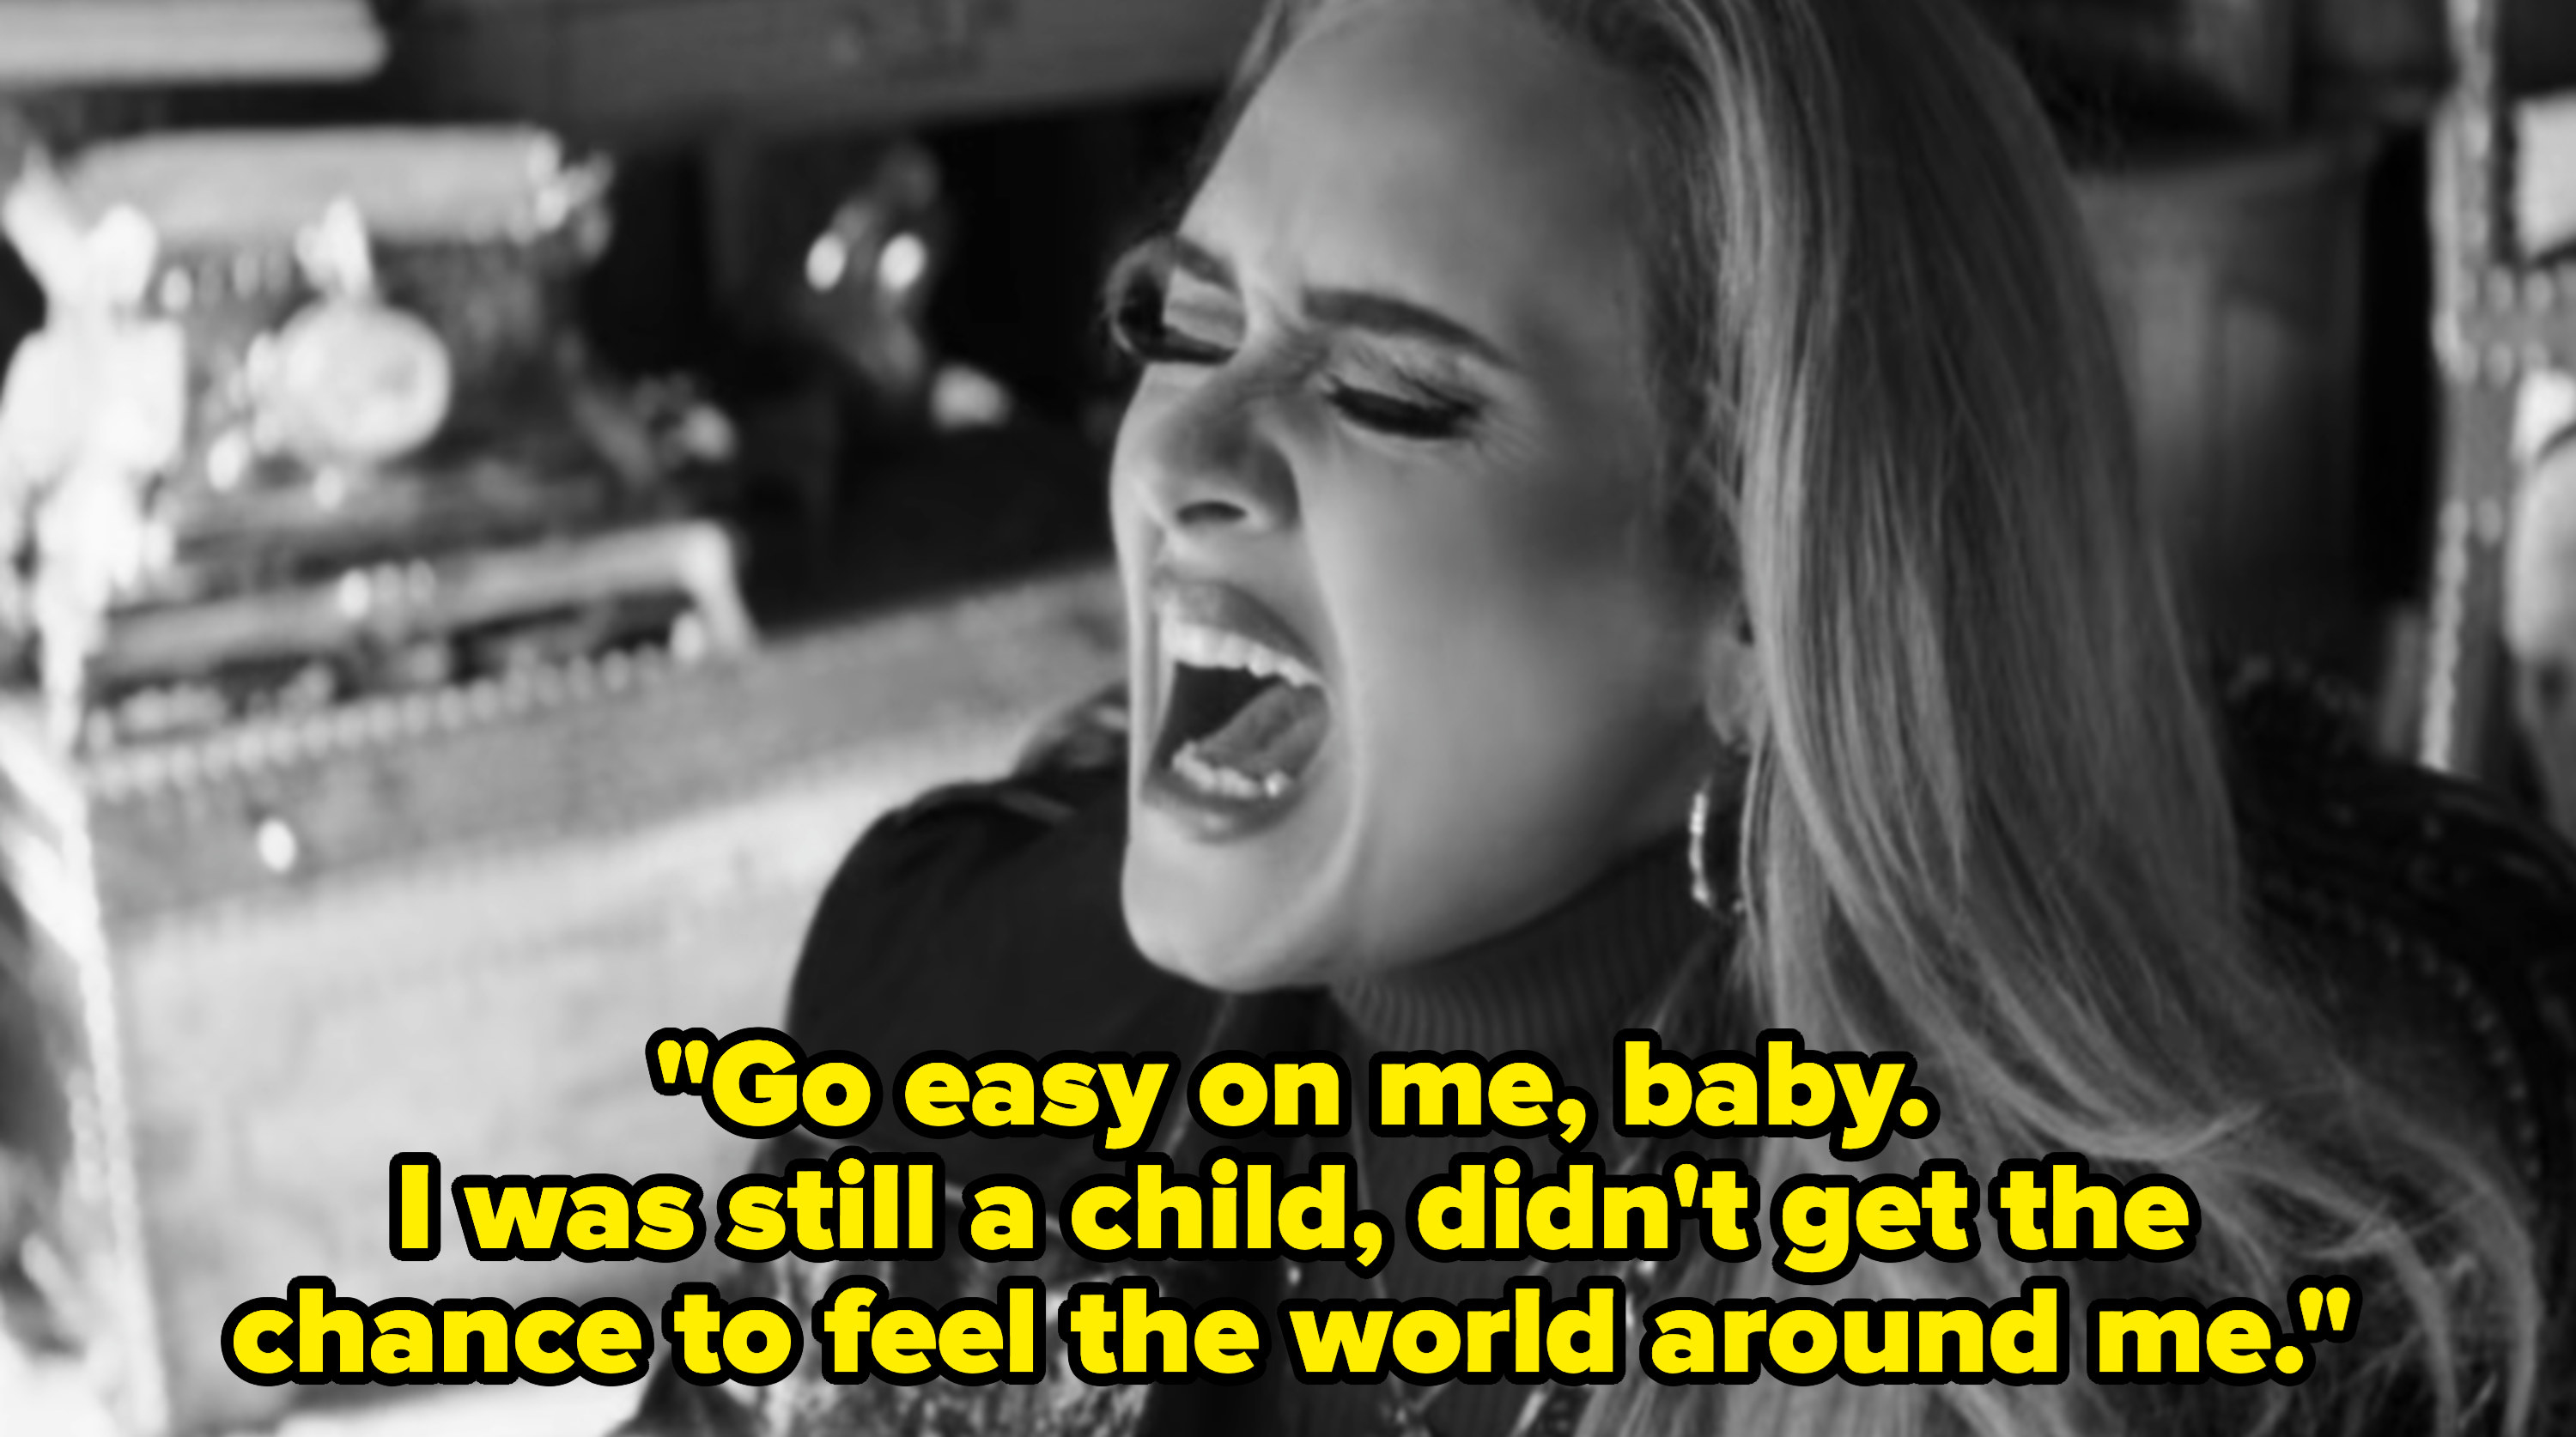 Adele sings &quot;Go easy on me, baby.I was still a child, didn&#x27;t get the chance to feel the world around me&quot;